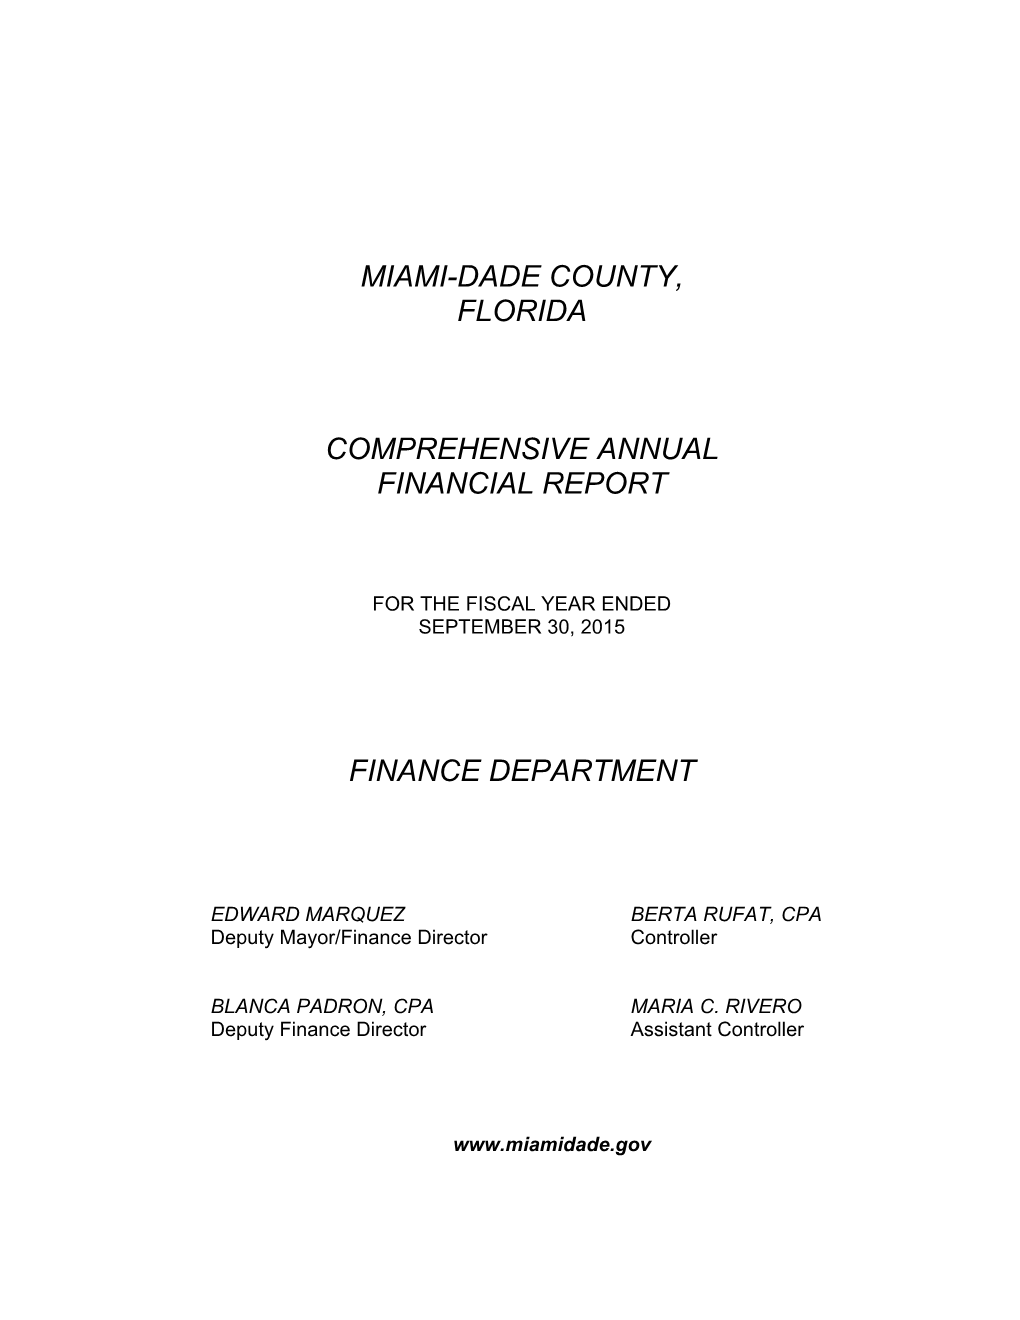 MIAMI-DADE COUNTY, FLORIDA Comprehensive Annual Financial Report for the Fiscal Year Ended September 30, 2015